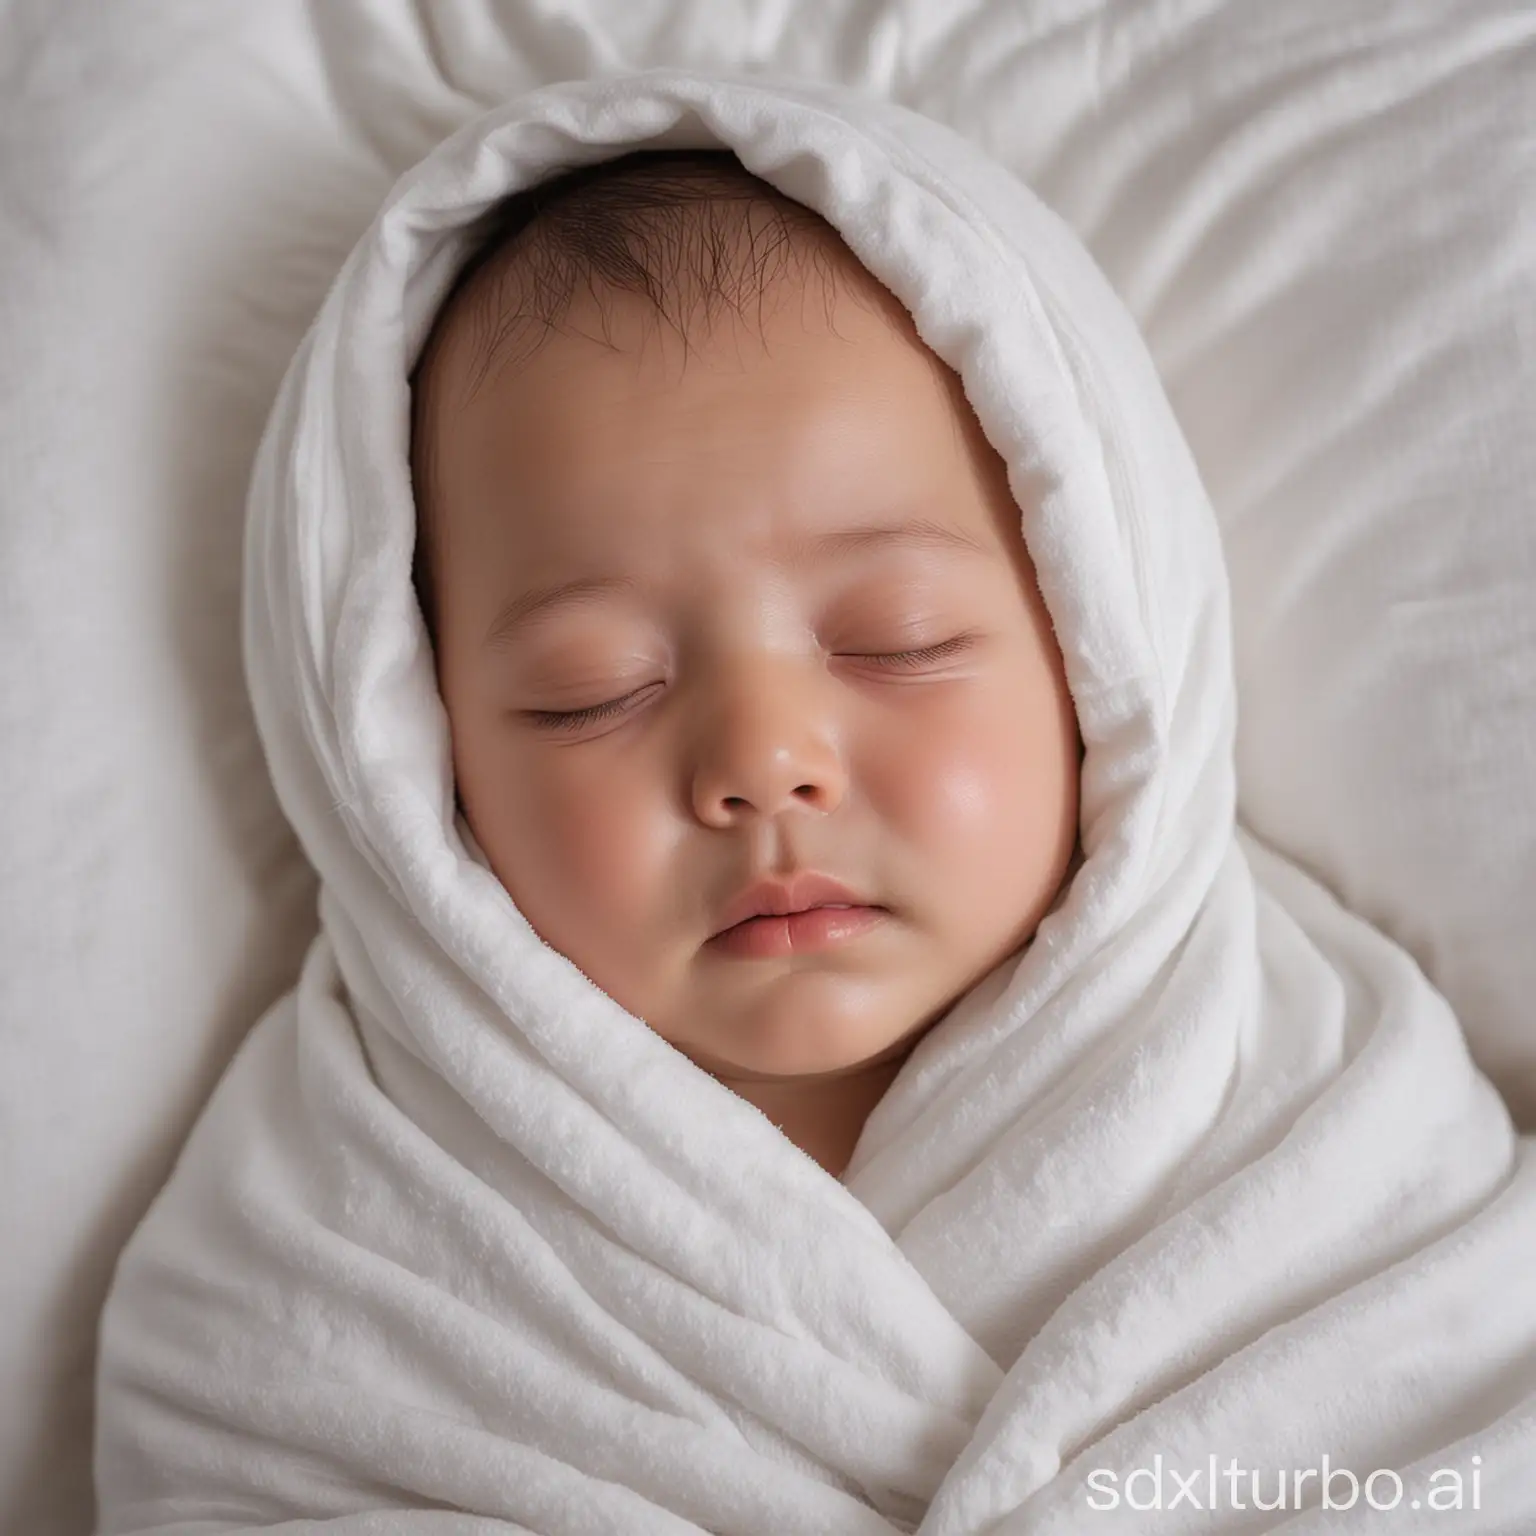 a baby boy, with double eyelids, sleeping, lying in a white blanket, only his head outside